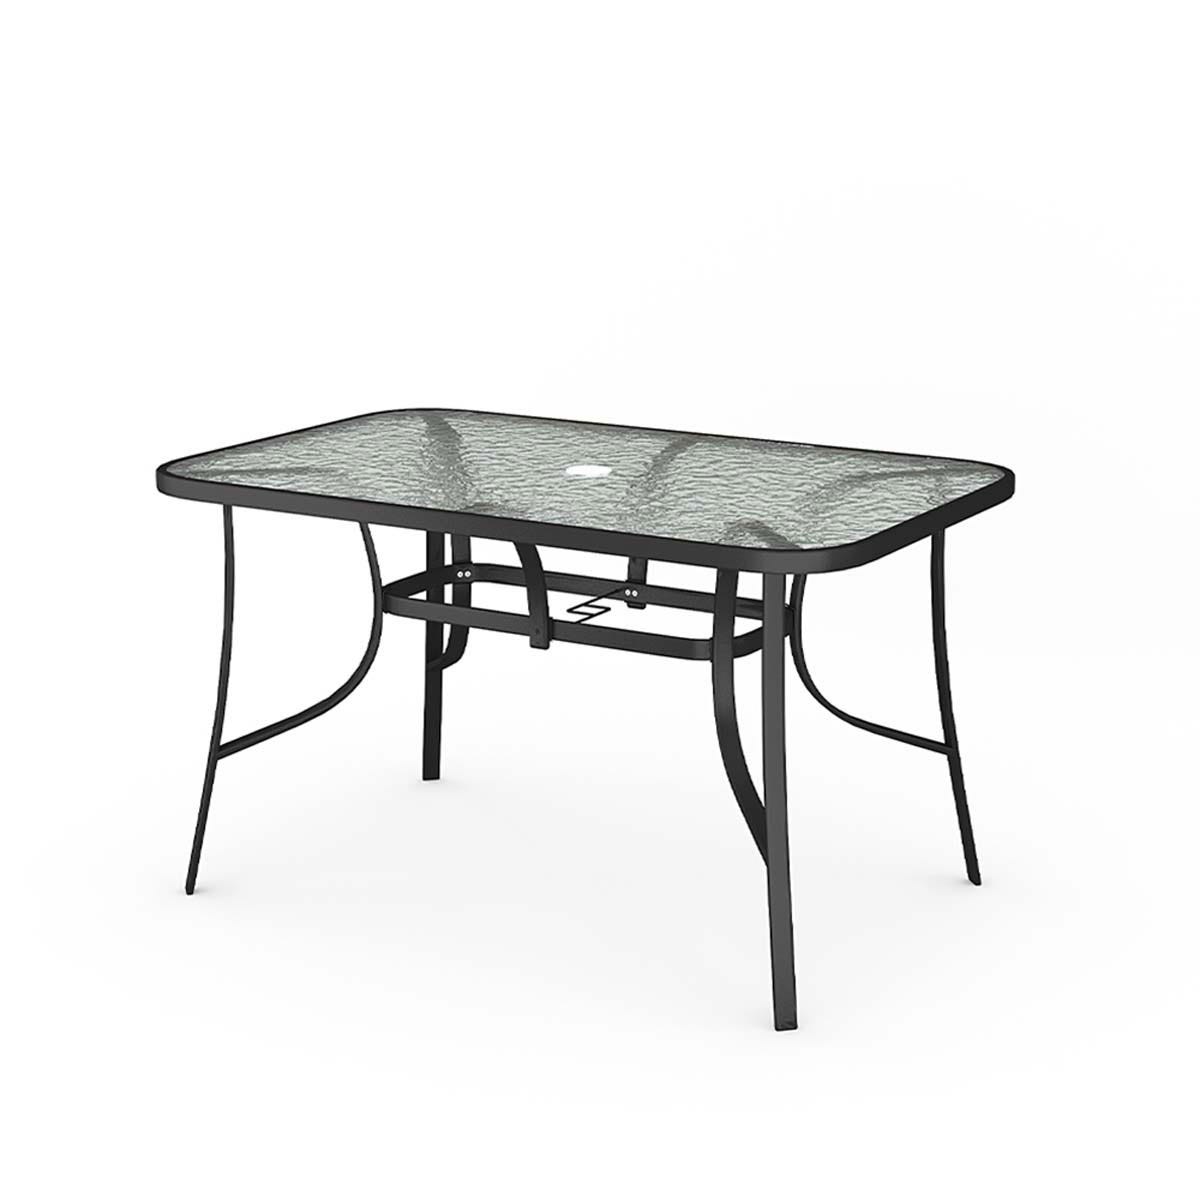 Livingandhome 120cm Garden Tempered Glass Table With Umbrella Hole - Black